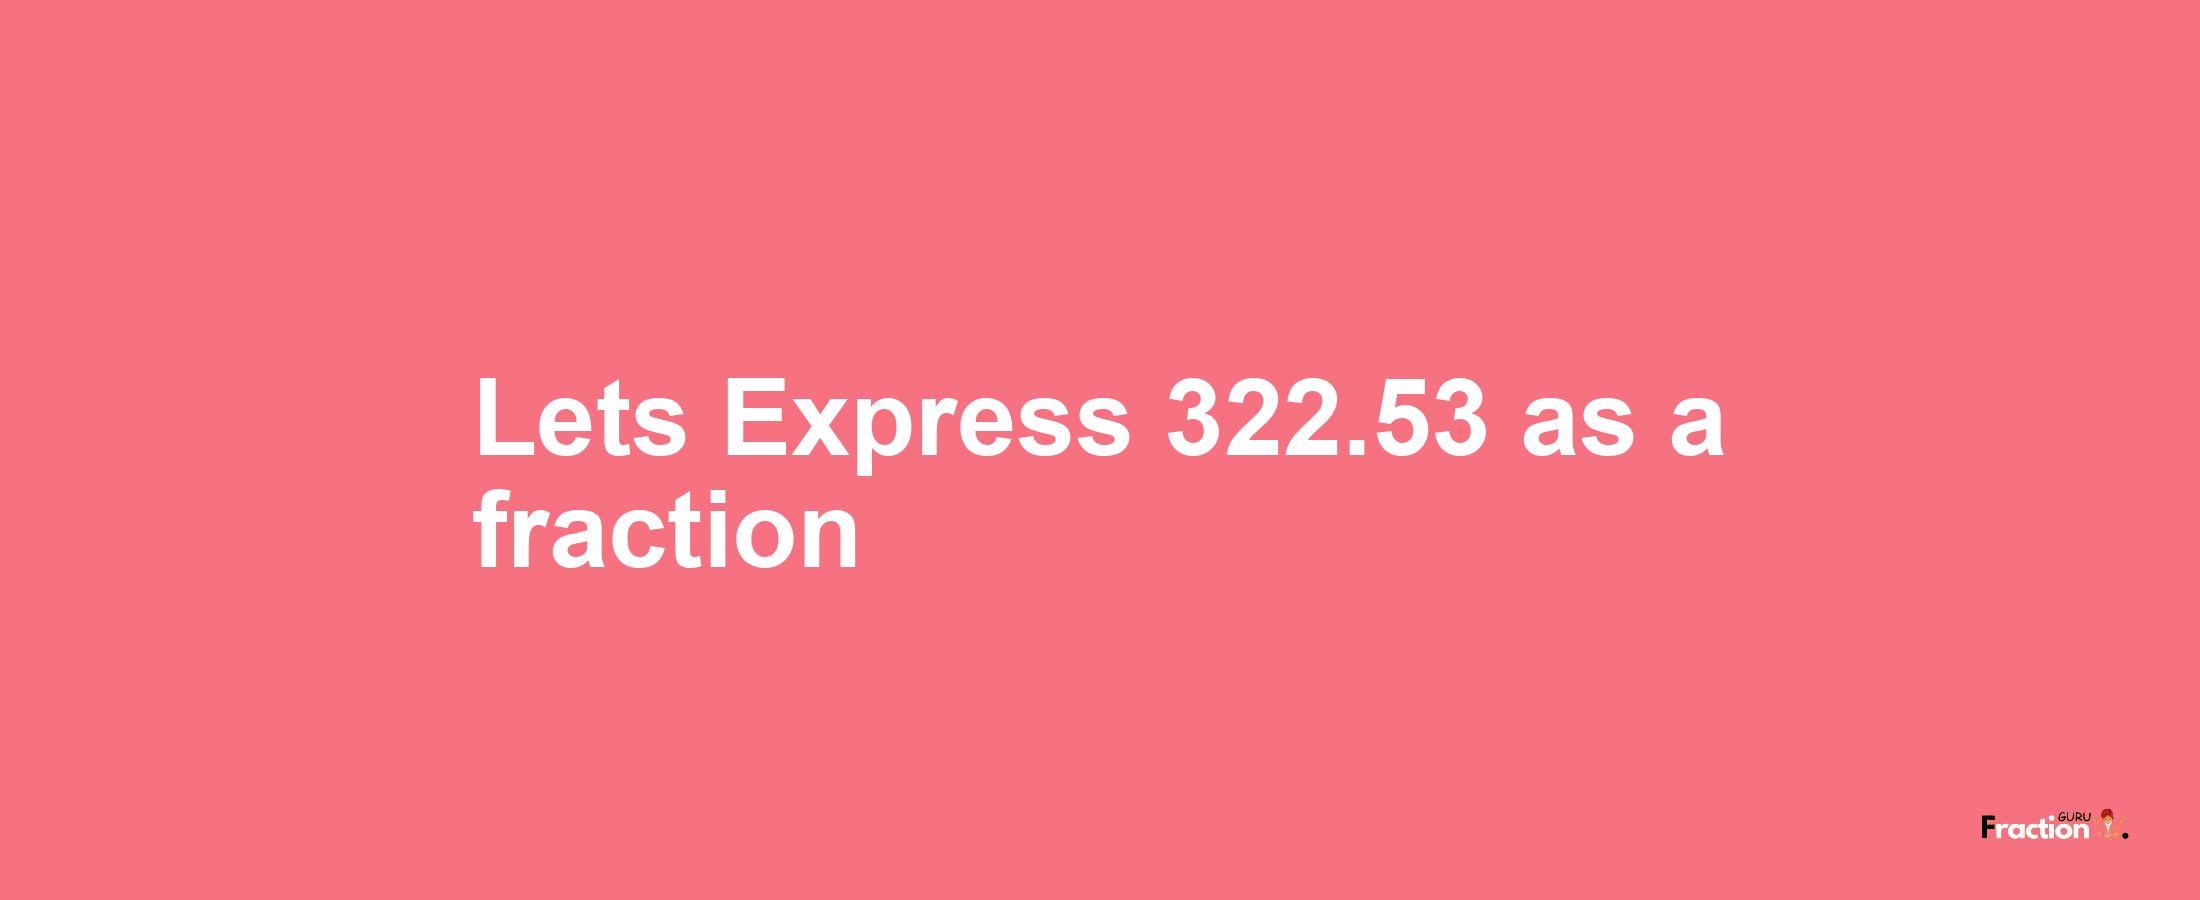 Lets Express 322.53 as afraction